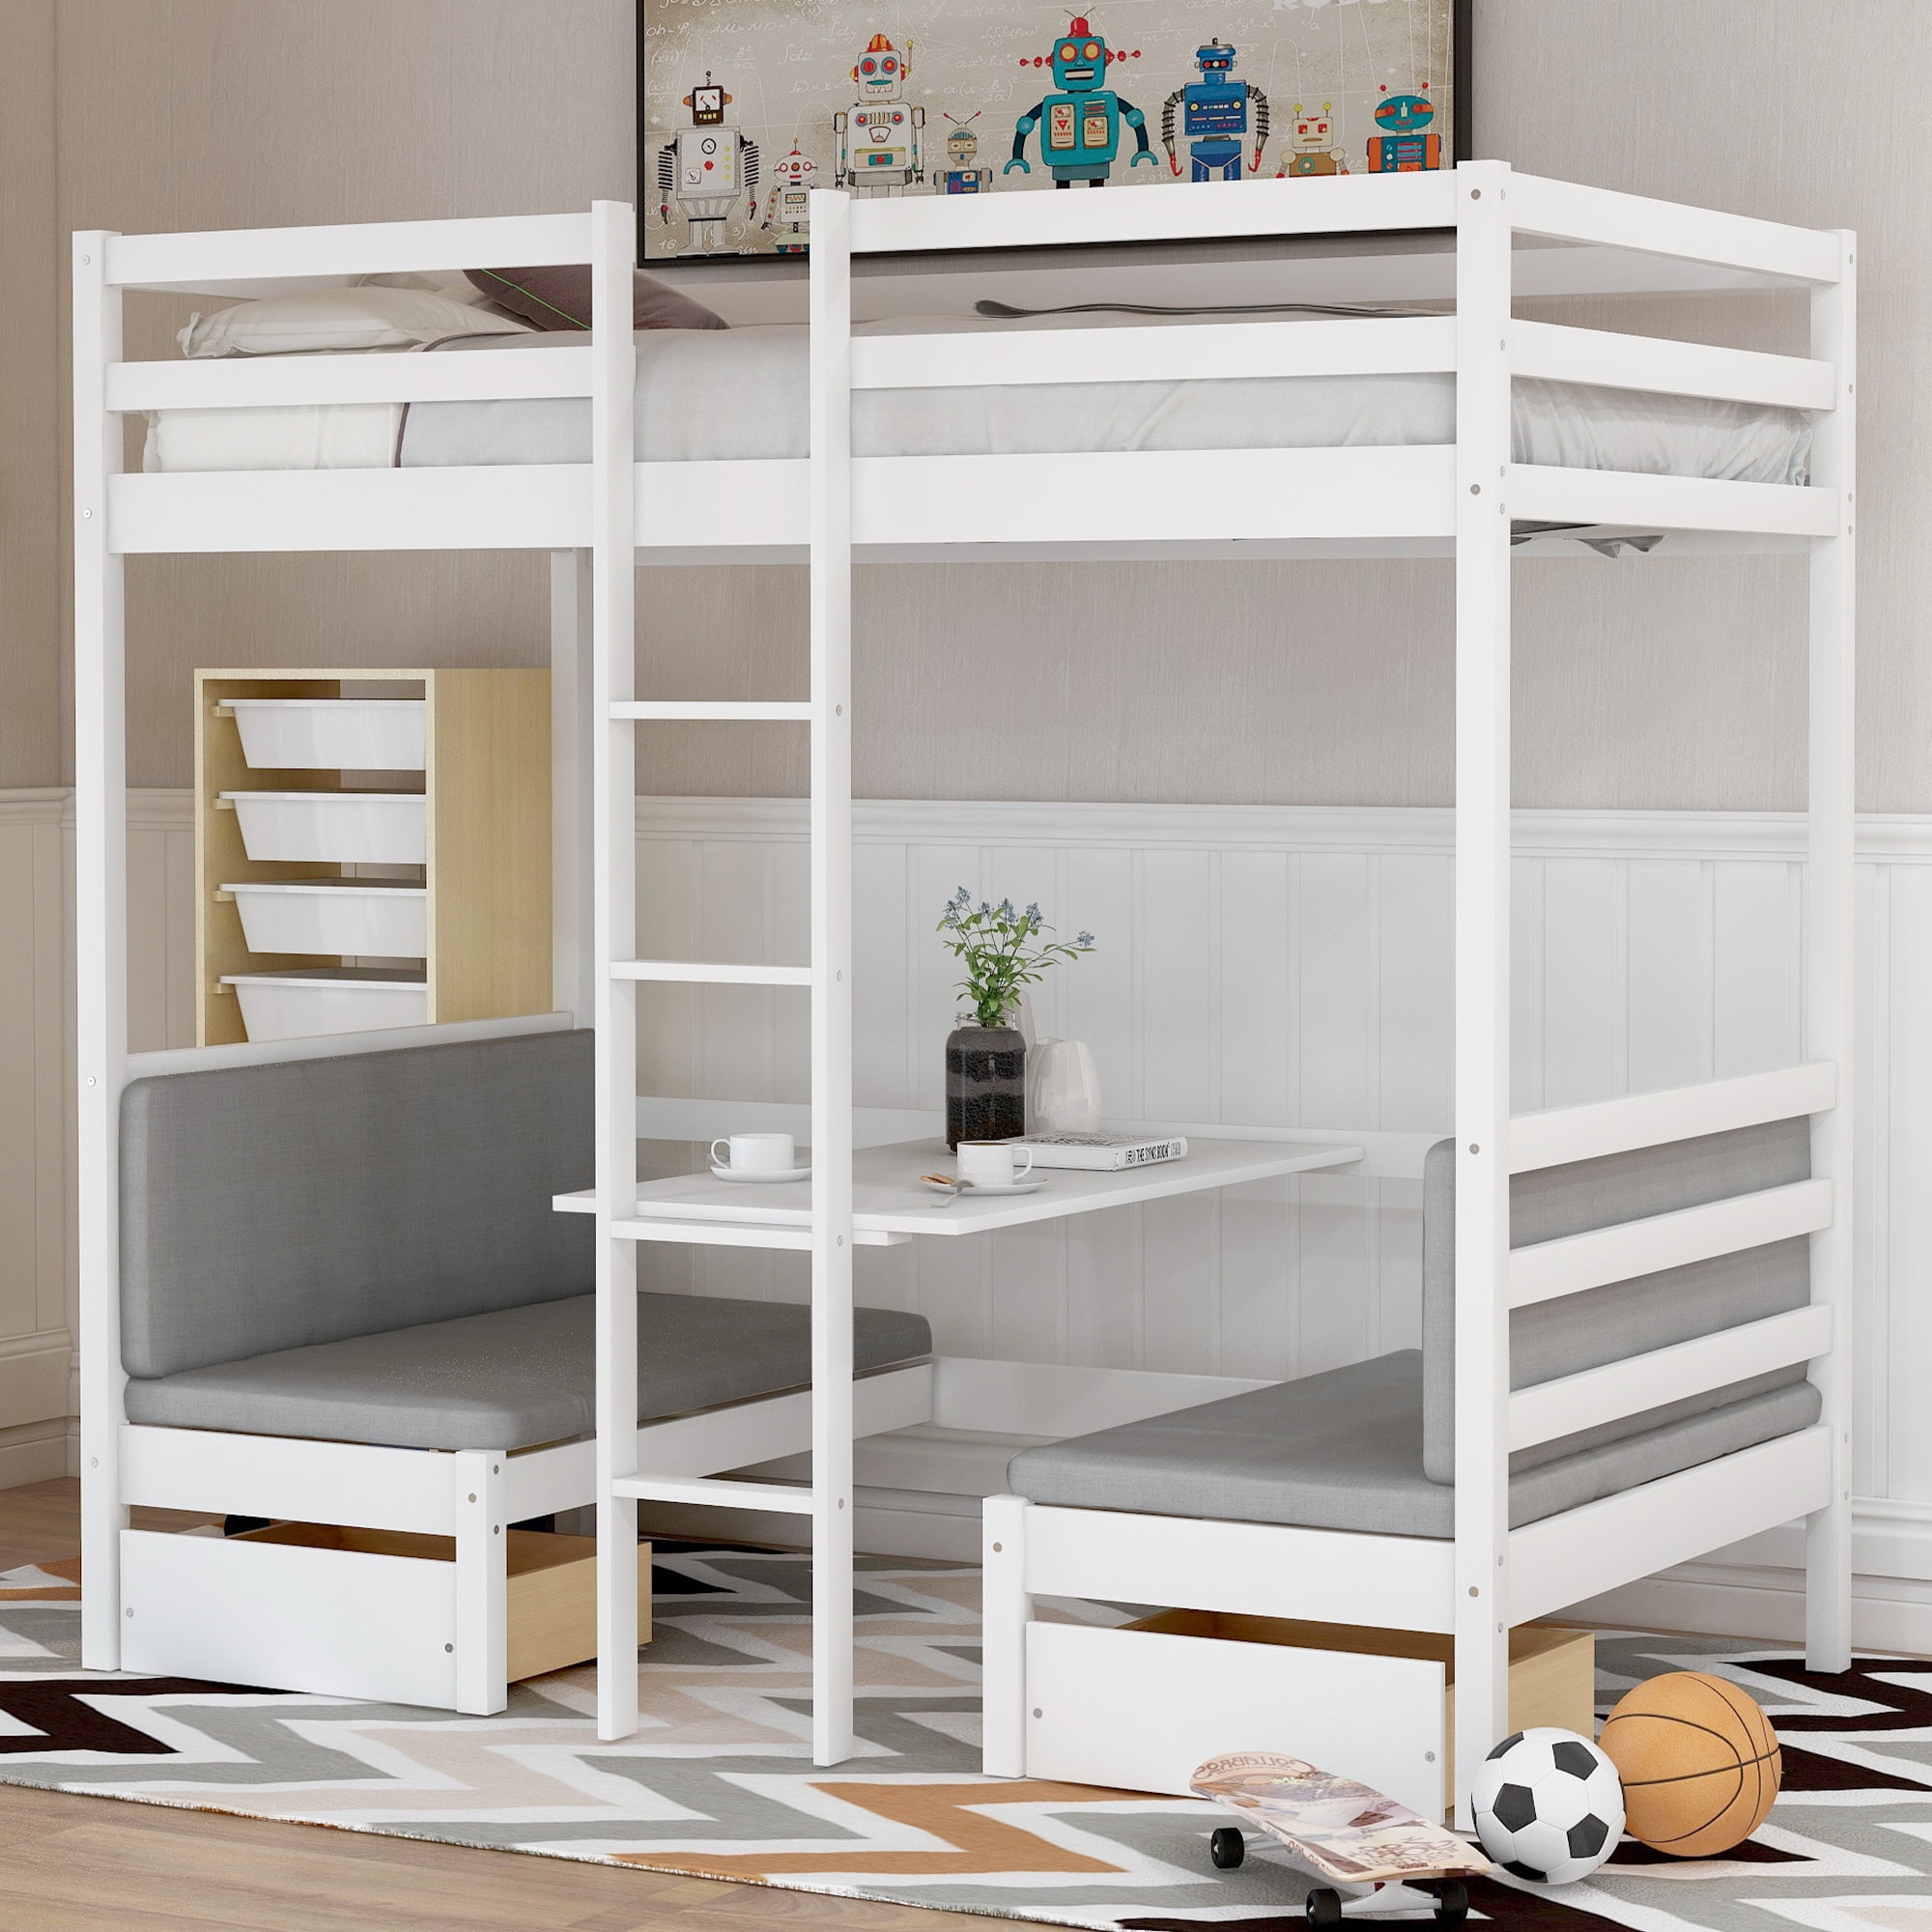 Euroco Solid Wood Convertible Twin Bunk, Twin Beds That Can Convert To Bunk Beds